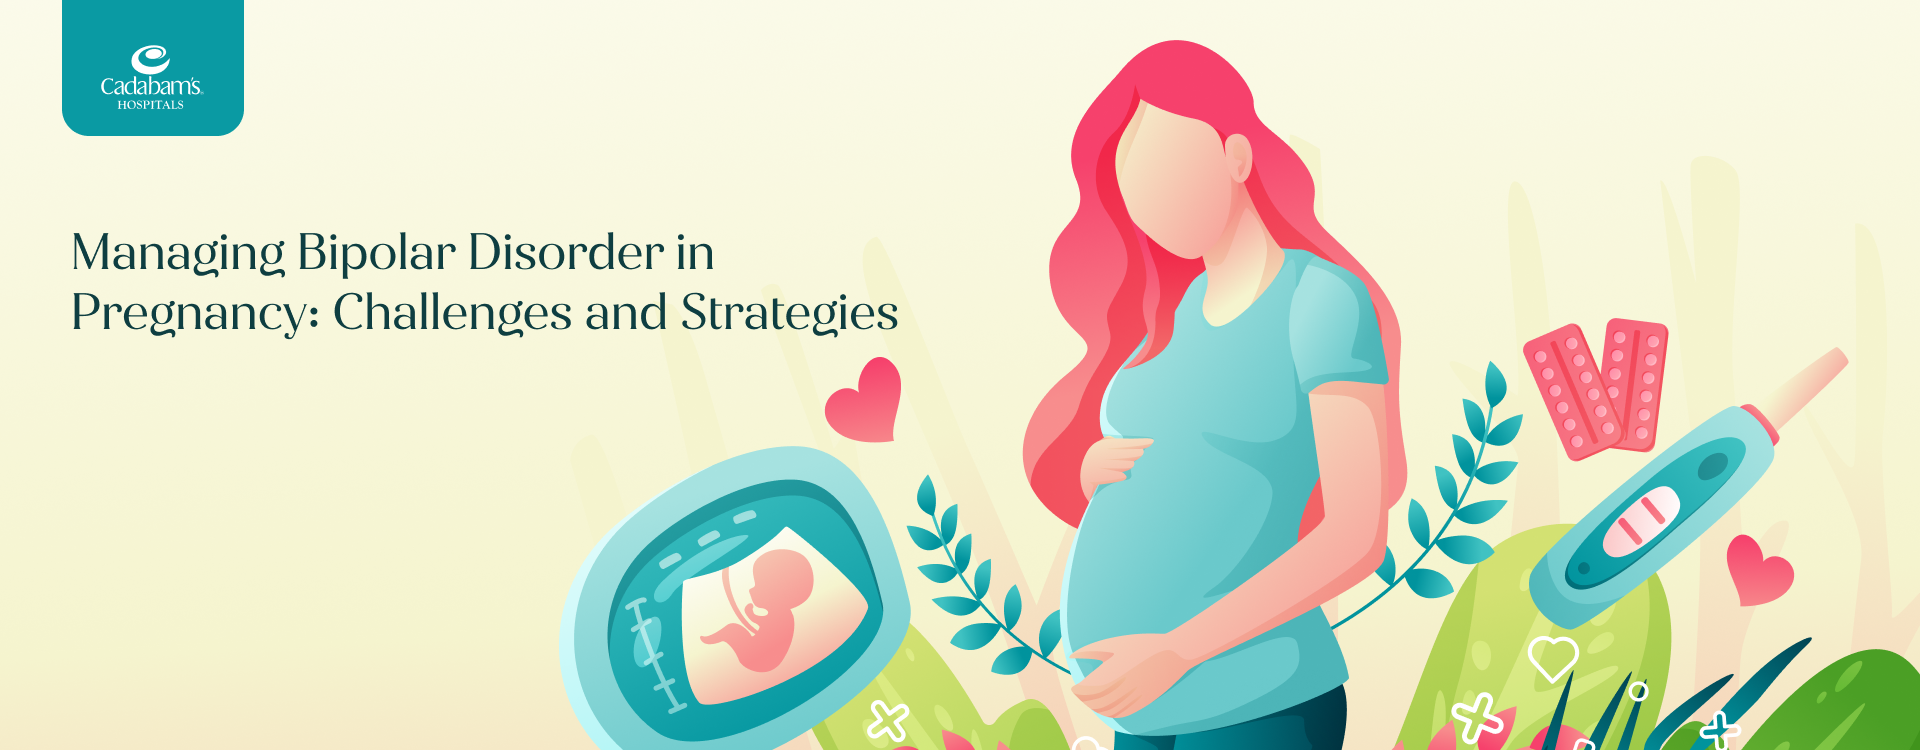 Managing Bipolar Disorder in Pregnancy_ Challenges and Strategies